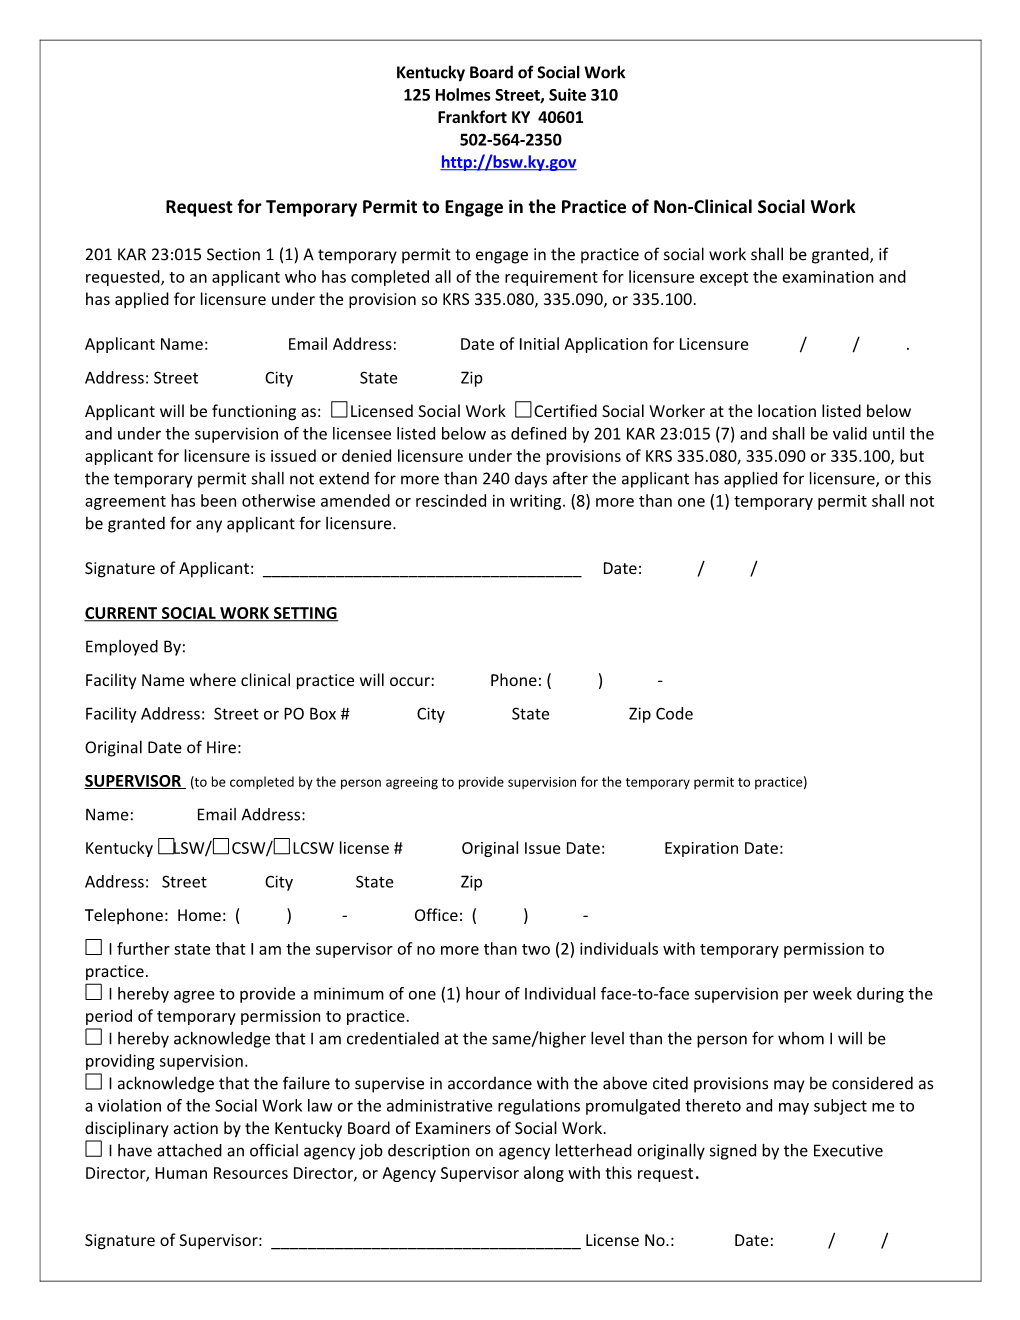 Temporary Permit Application for Temporary Permit to Practice Non-Clinical Social Work